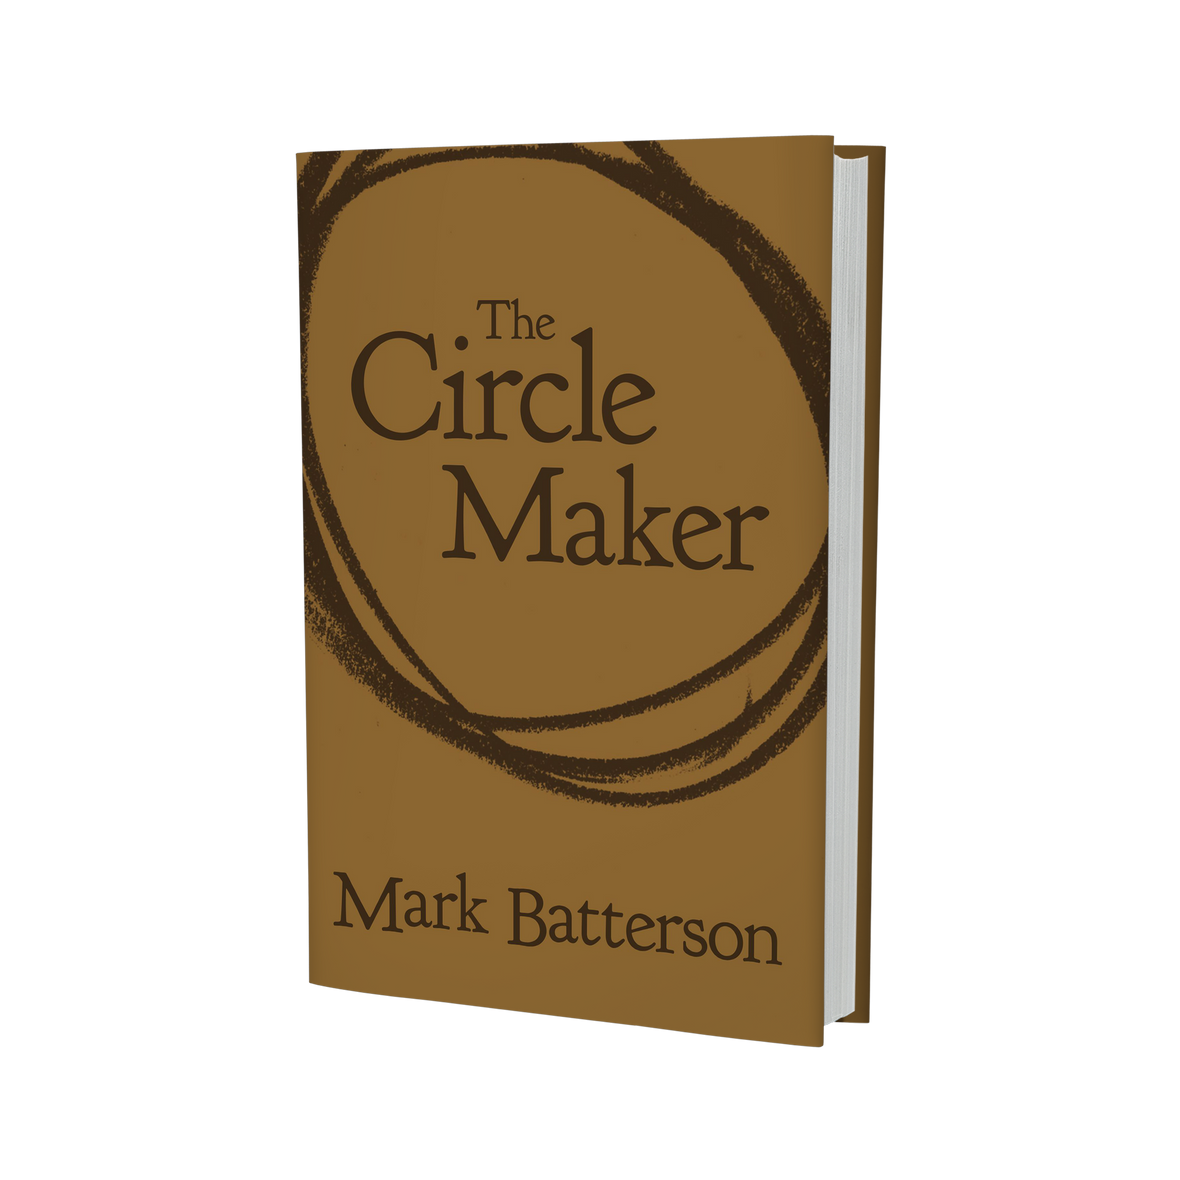 The Circle Maker: Praying Circles Around Your Biggest Dreams and Greatest  Fears by Mark Batterson, Paperback